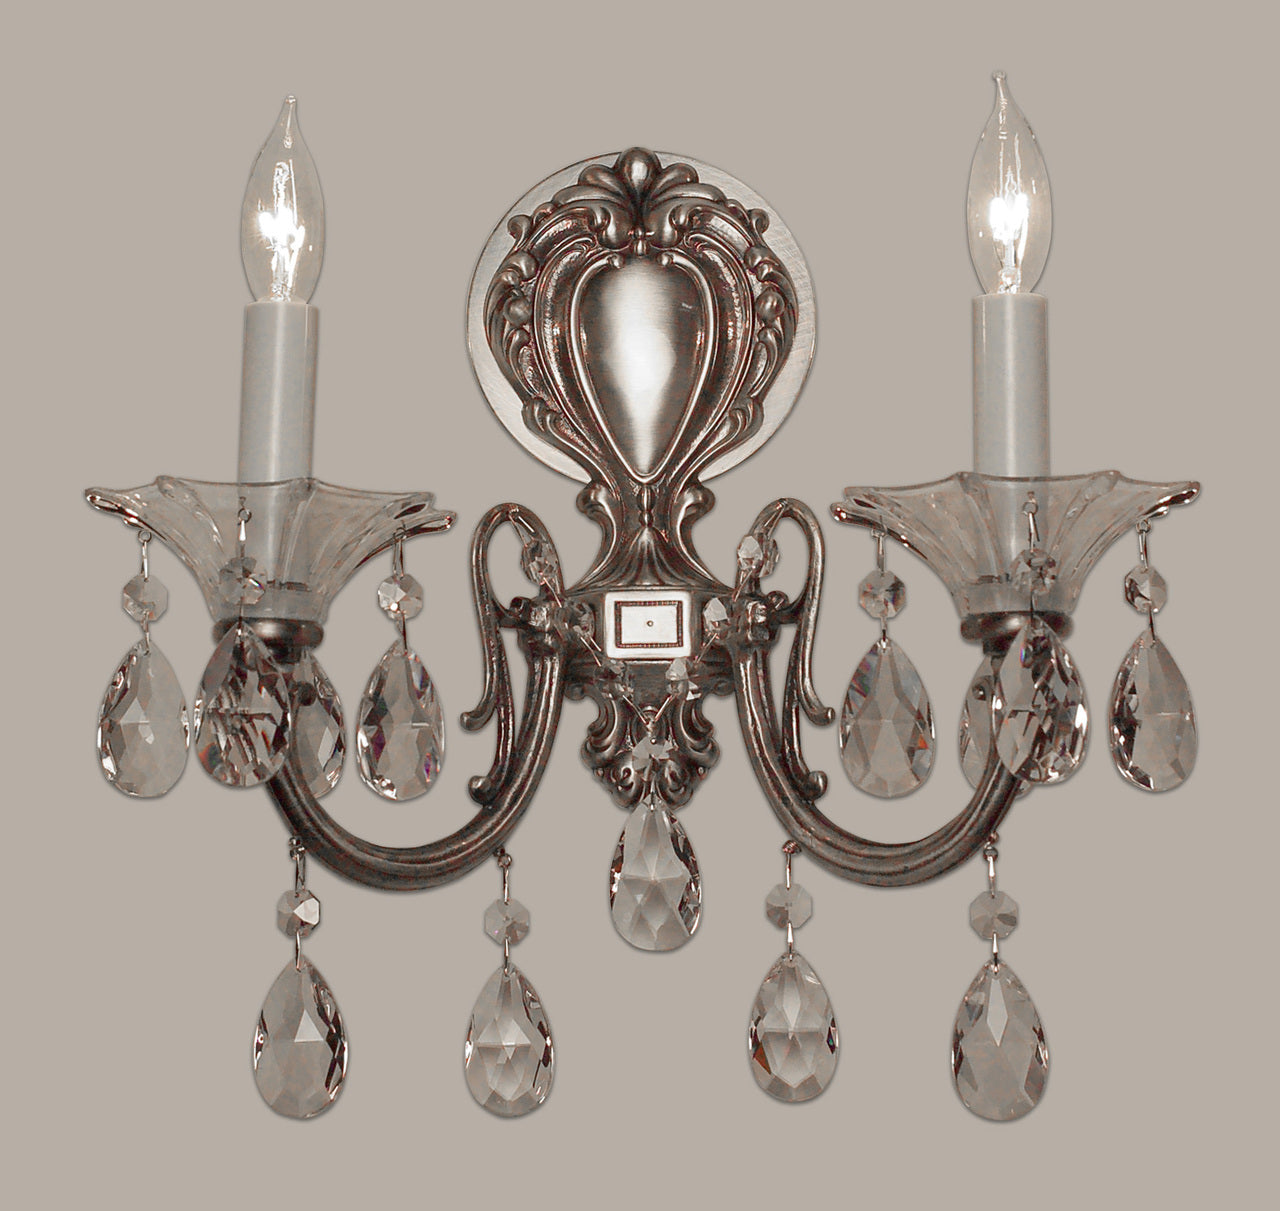 Classic Lighting 57052 RB SC Via Lombardi Crystal Wall Sconce in Roman Bronze (Imported from Spain)